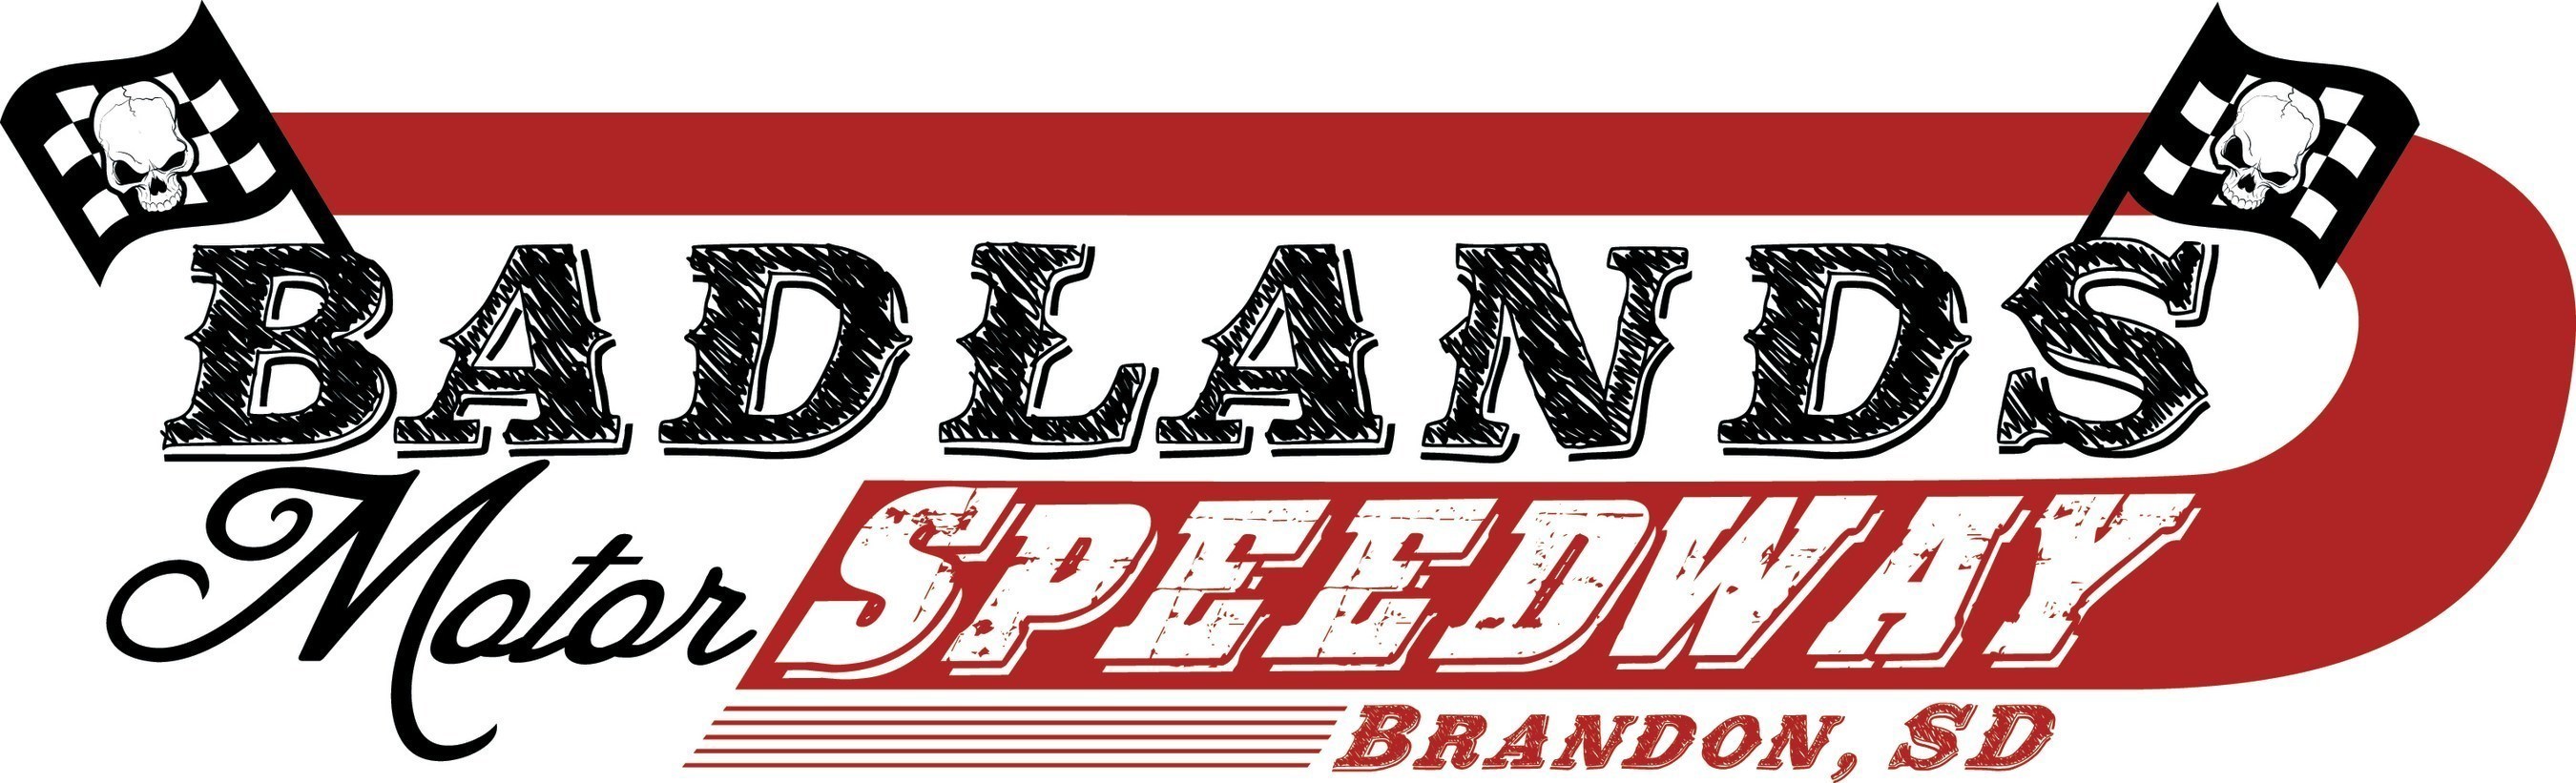 Badlands Entertainment Group has struck a deal to purchase the famed Huset's Speedway in Brandon, South Dakota. Badlands CEO Chuck Brennan says millions in improvements are being planned for the iconic family racing facility, which will officially become Badlands Motor Speedway for the 2016 season.